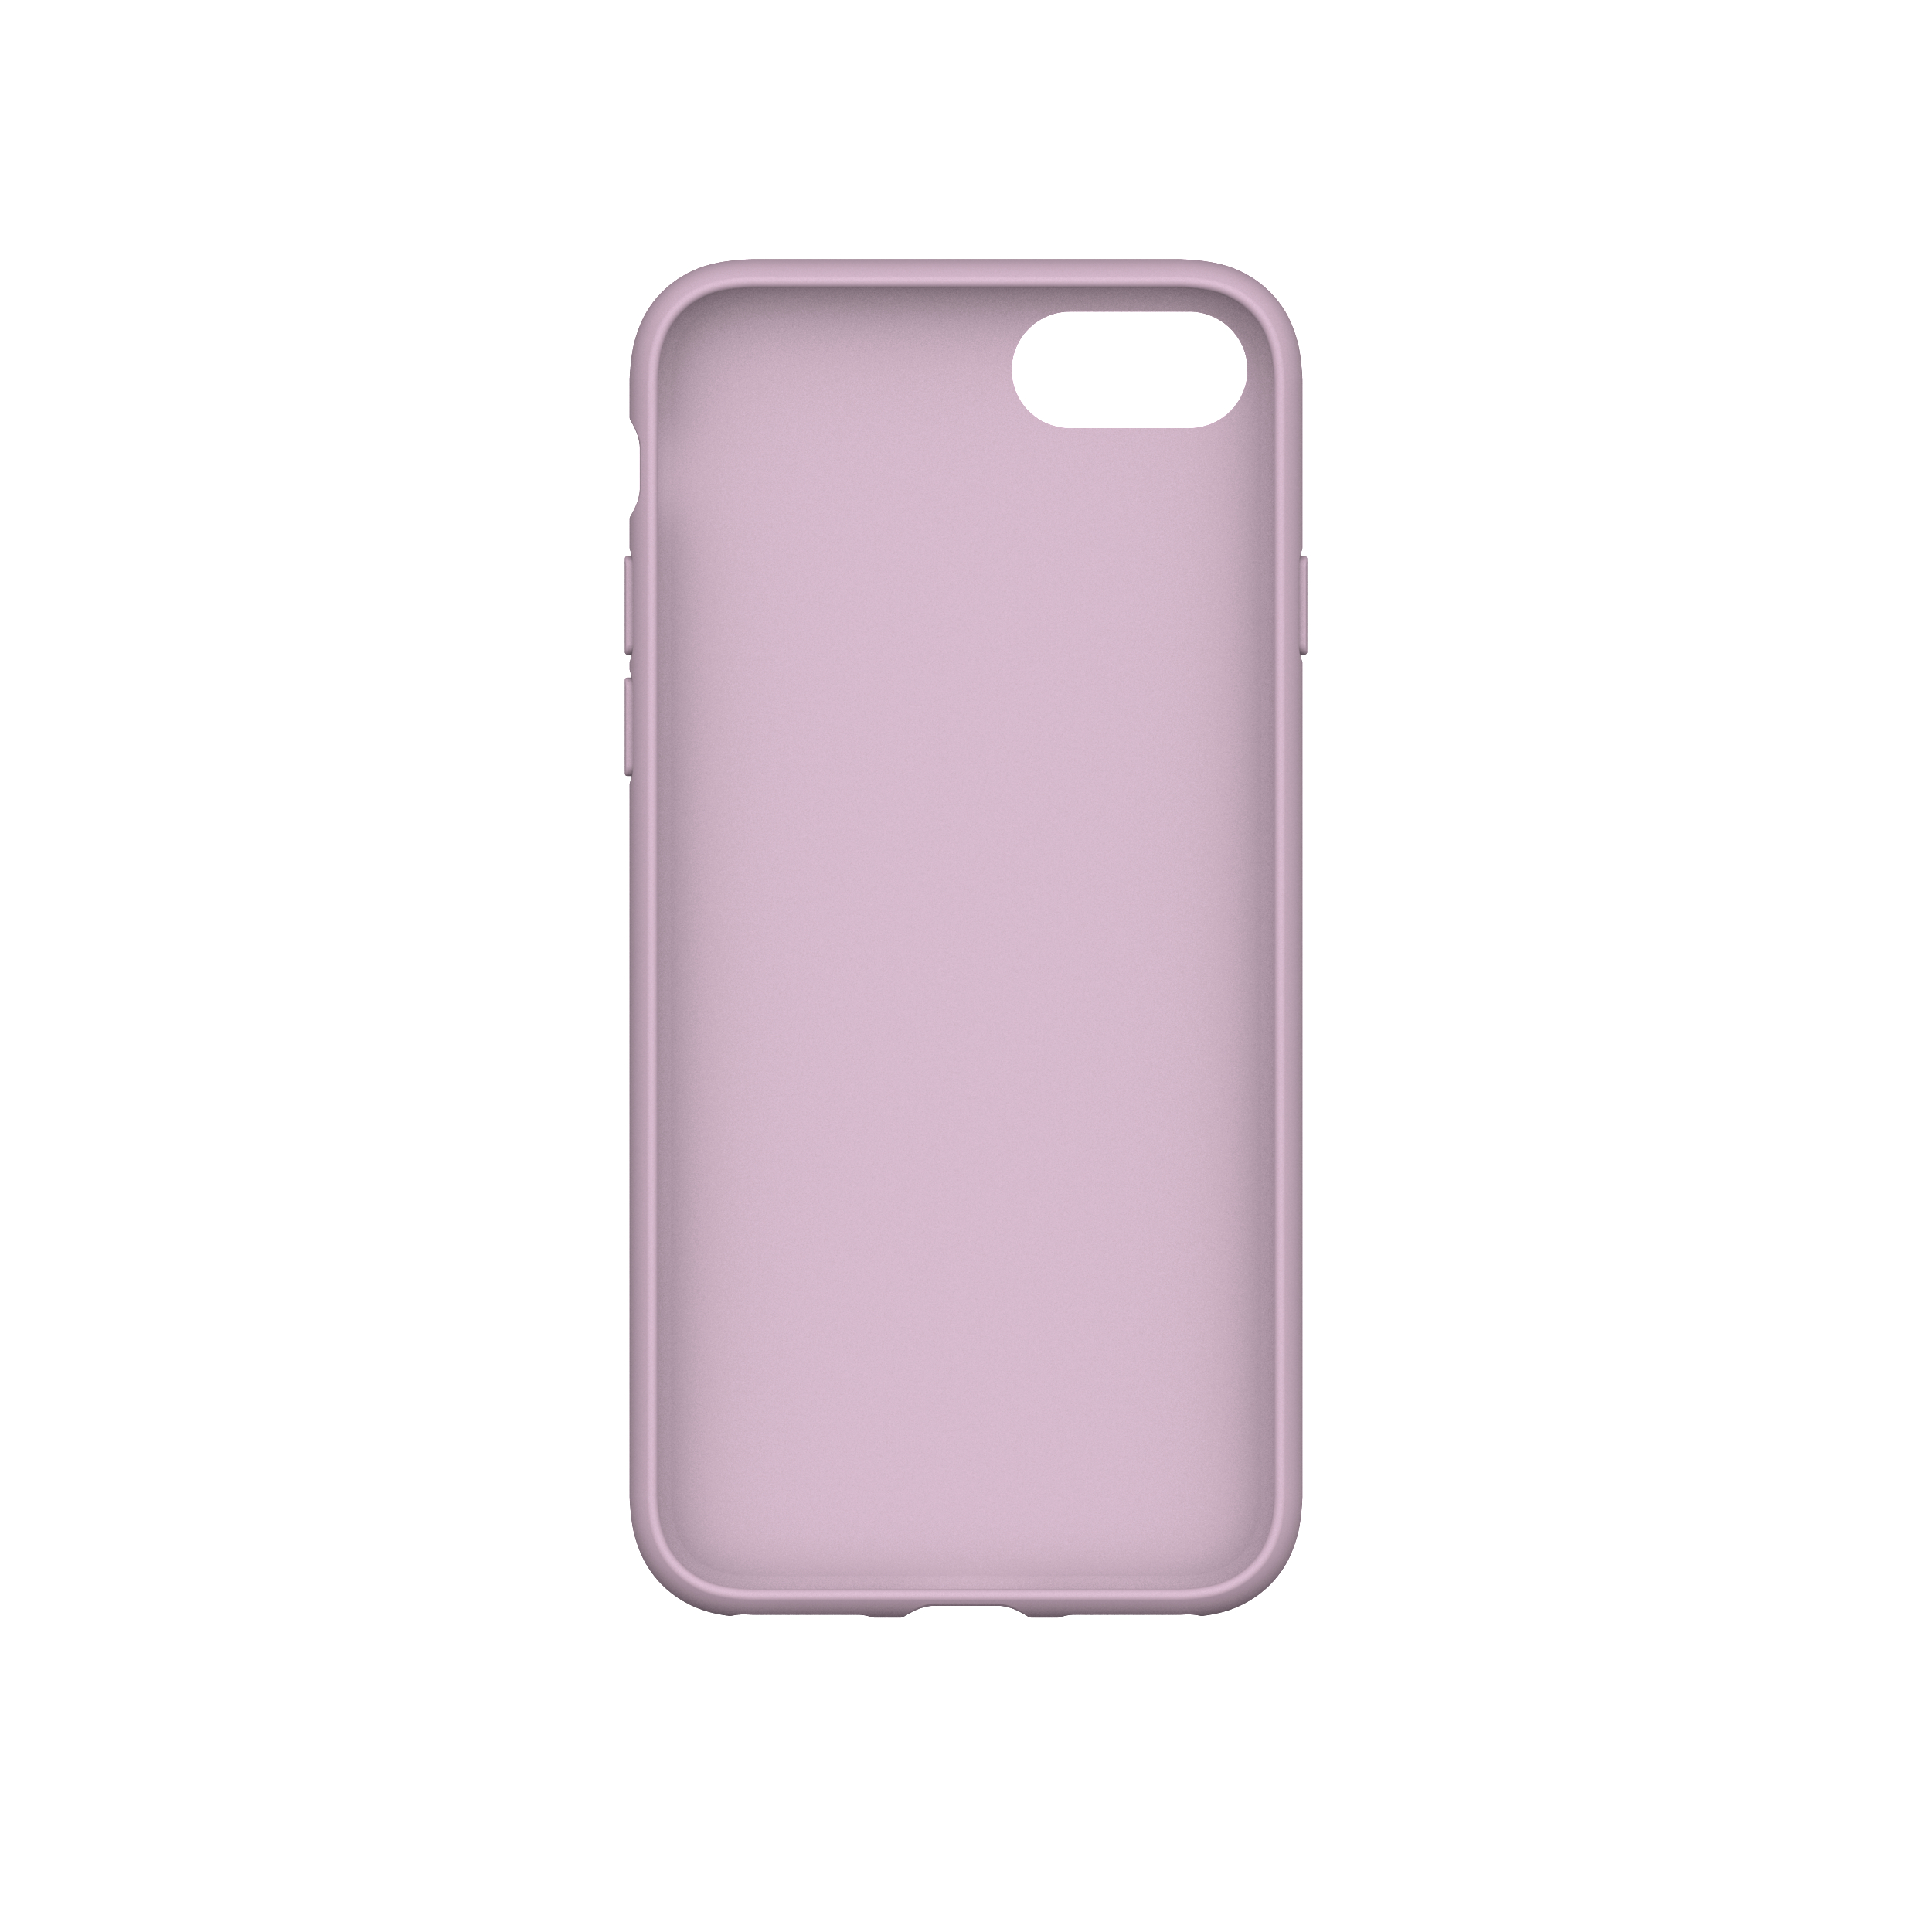 Apple, OR Backcover, iPhone 8, Rosa iPhone 6, (2020), Case, ORIGINALS iPhone Moulded ADIDAS SE iPhone 7,